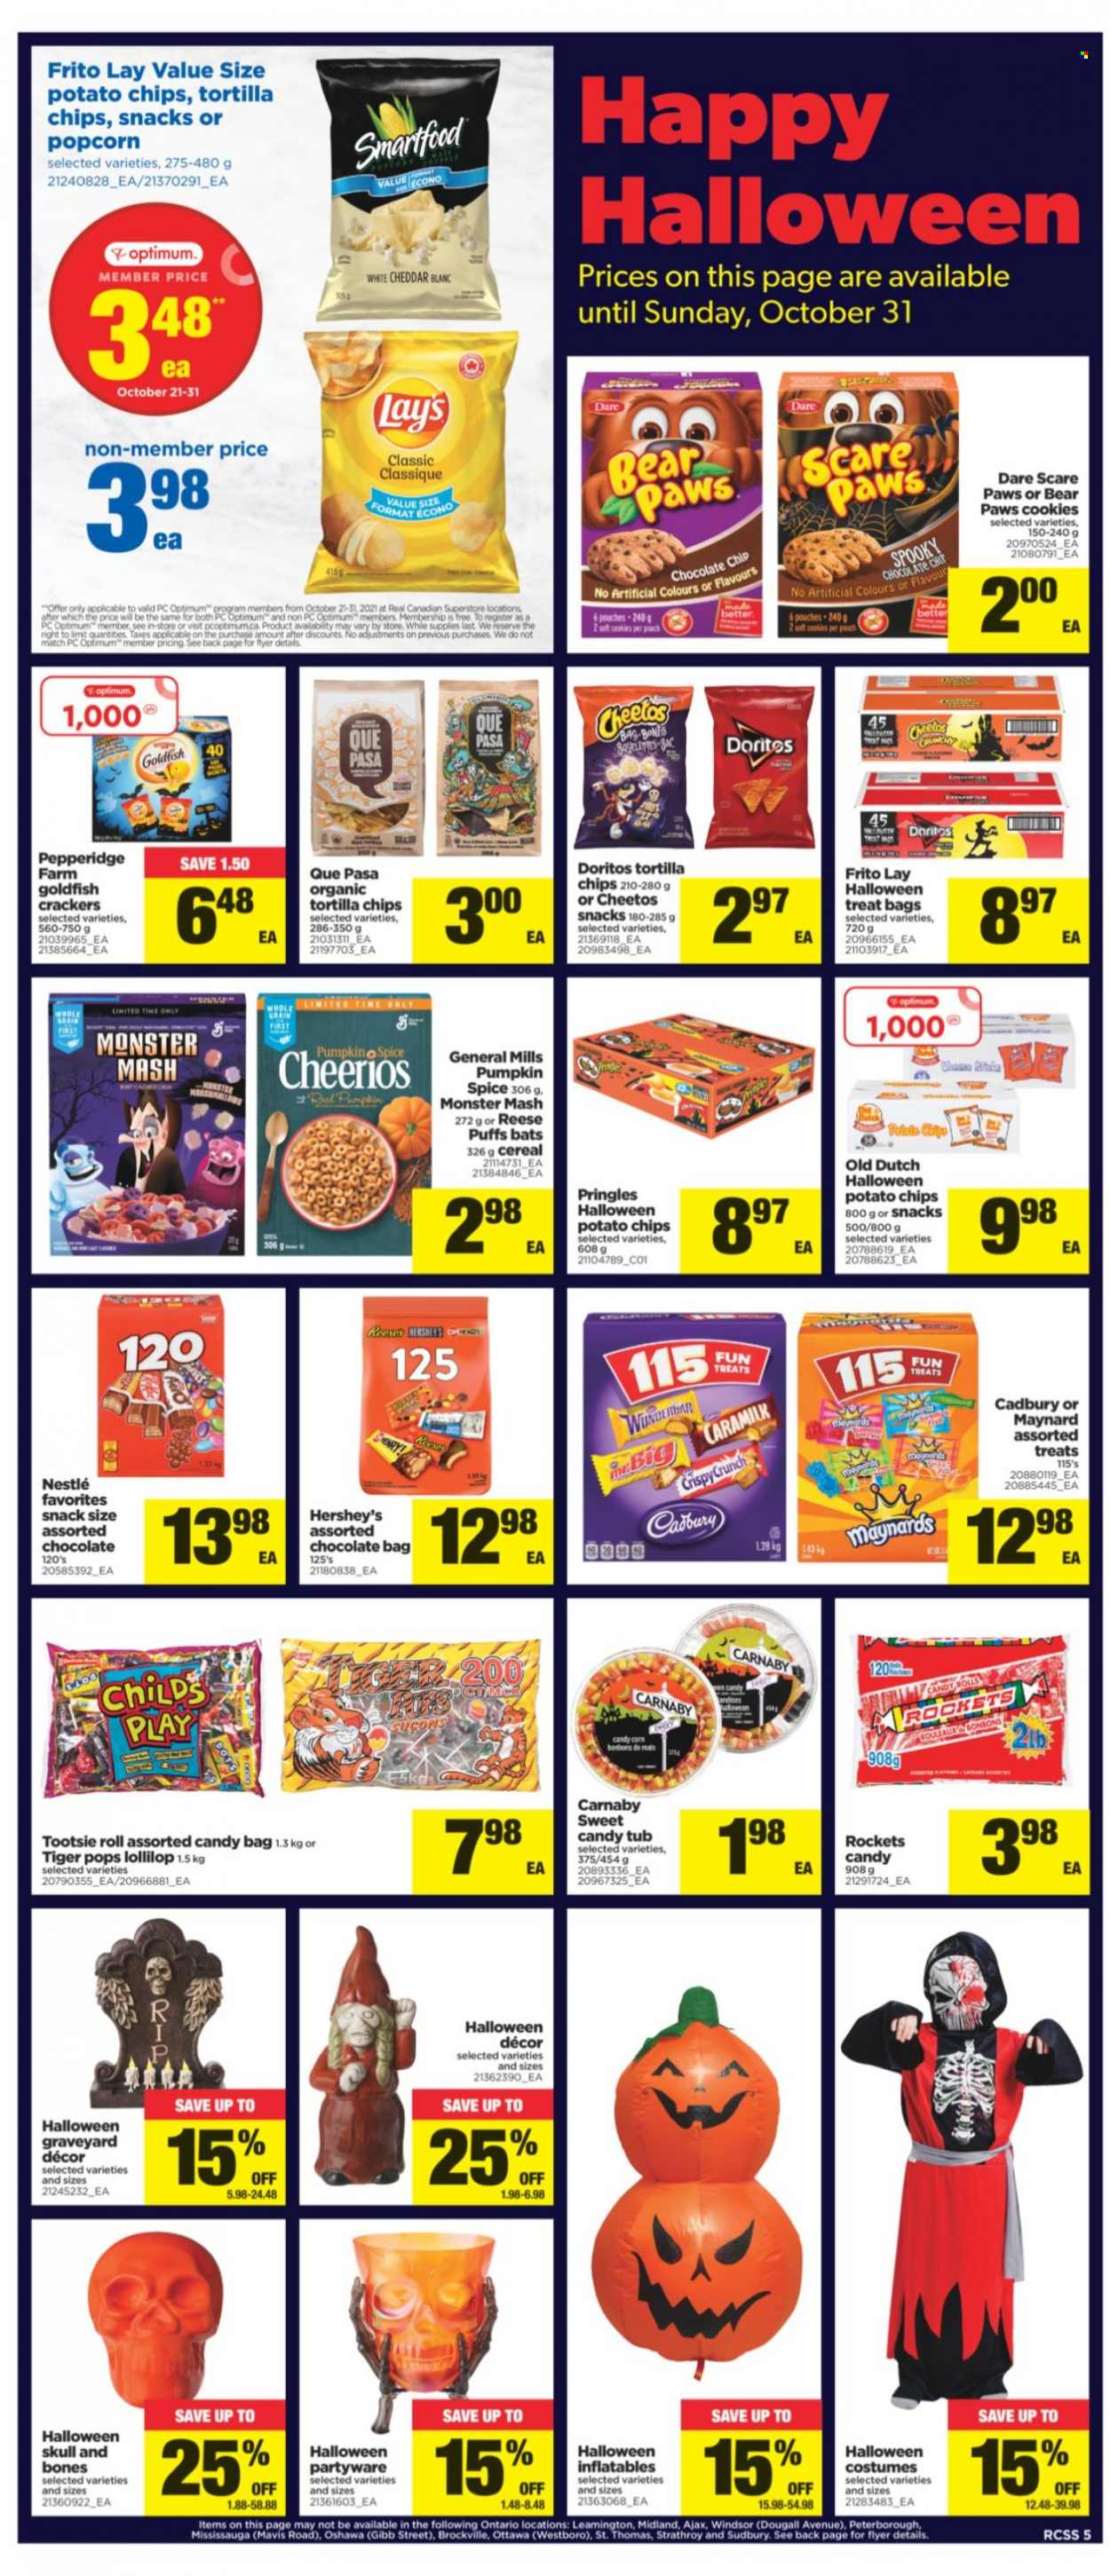 thumbnail - Real Canadian Superstore Flyer - October 21, 2021 - October 27, 2021 - Sales products - puffs, cheese, Reese's, Hershey's, cookies, crackers, Cadbury, Doritos, tortilla chips, potato chips, Pringles, Cheetos, Lay’s, popcorn, Goldfish, cereals, Cheerios, spice, Monster, nappies, Ajax, Paws, Optimum, Halloween, costume, Nestlé, chips. Page 5.